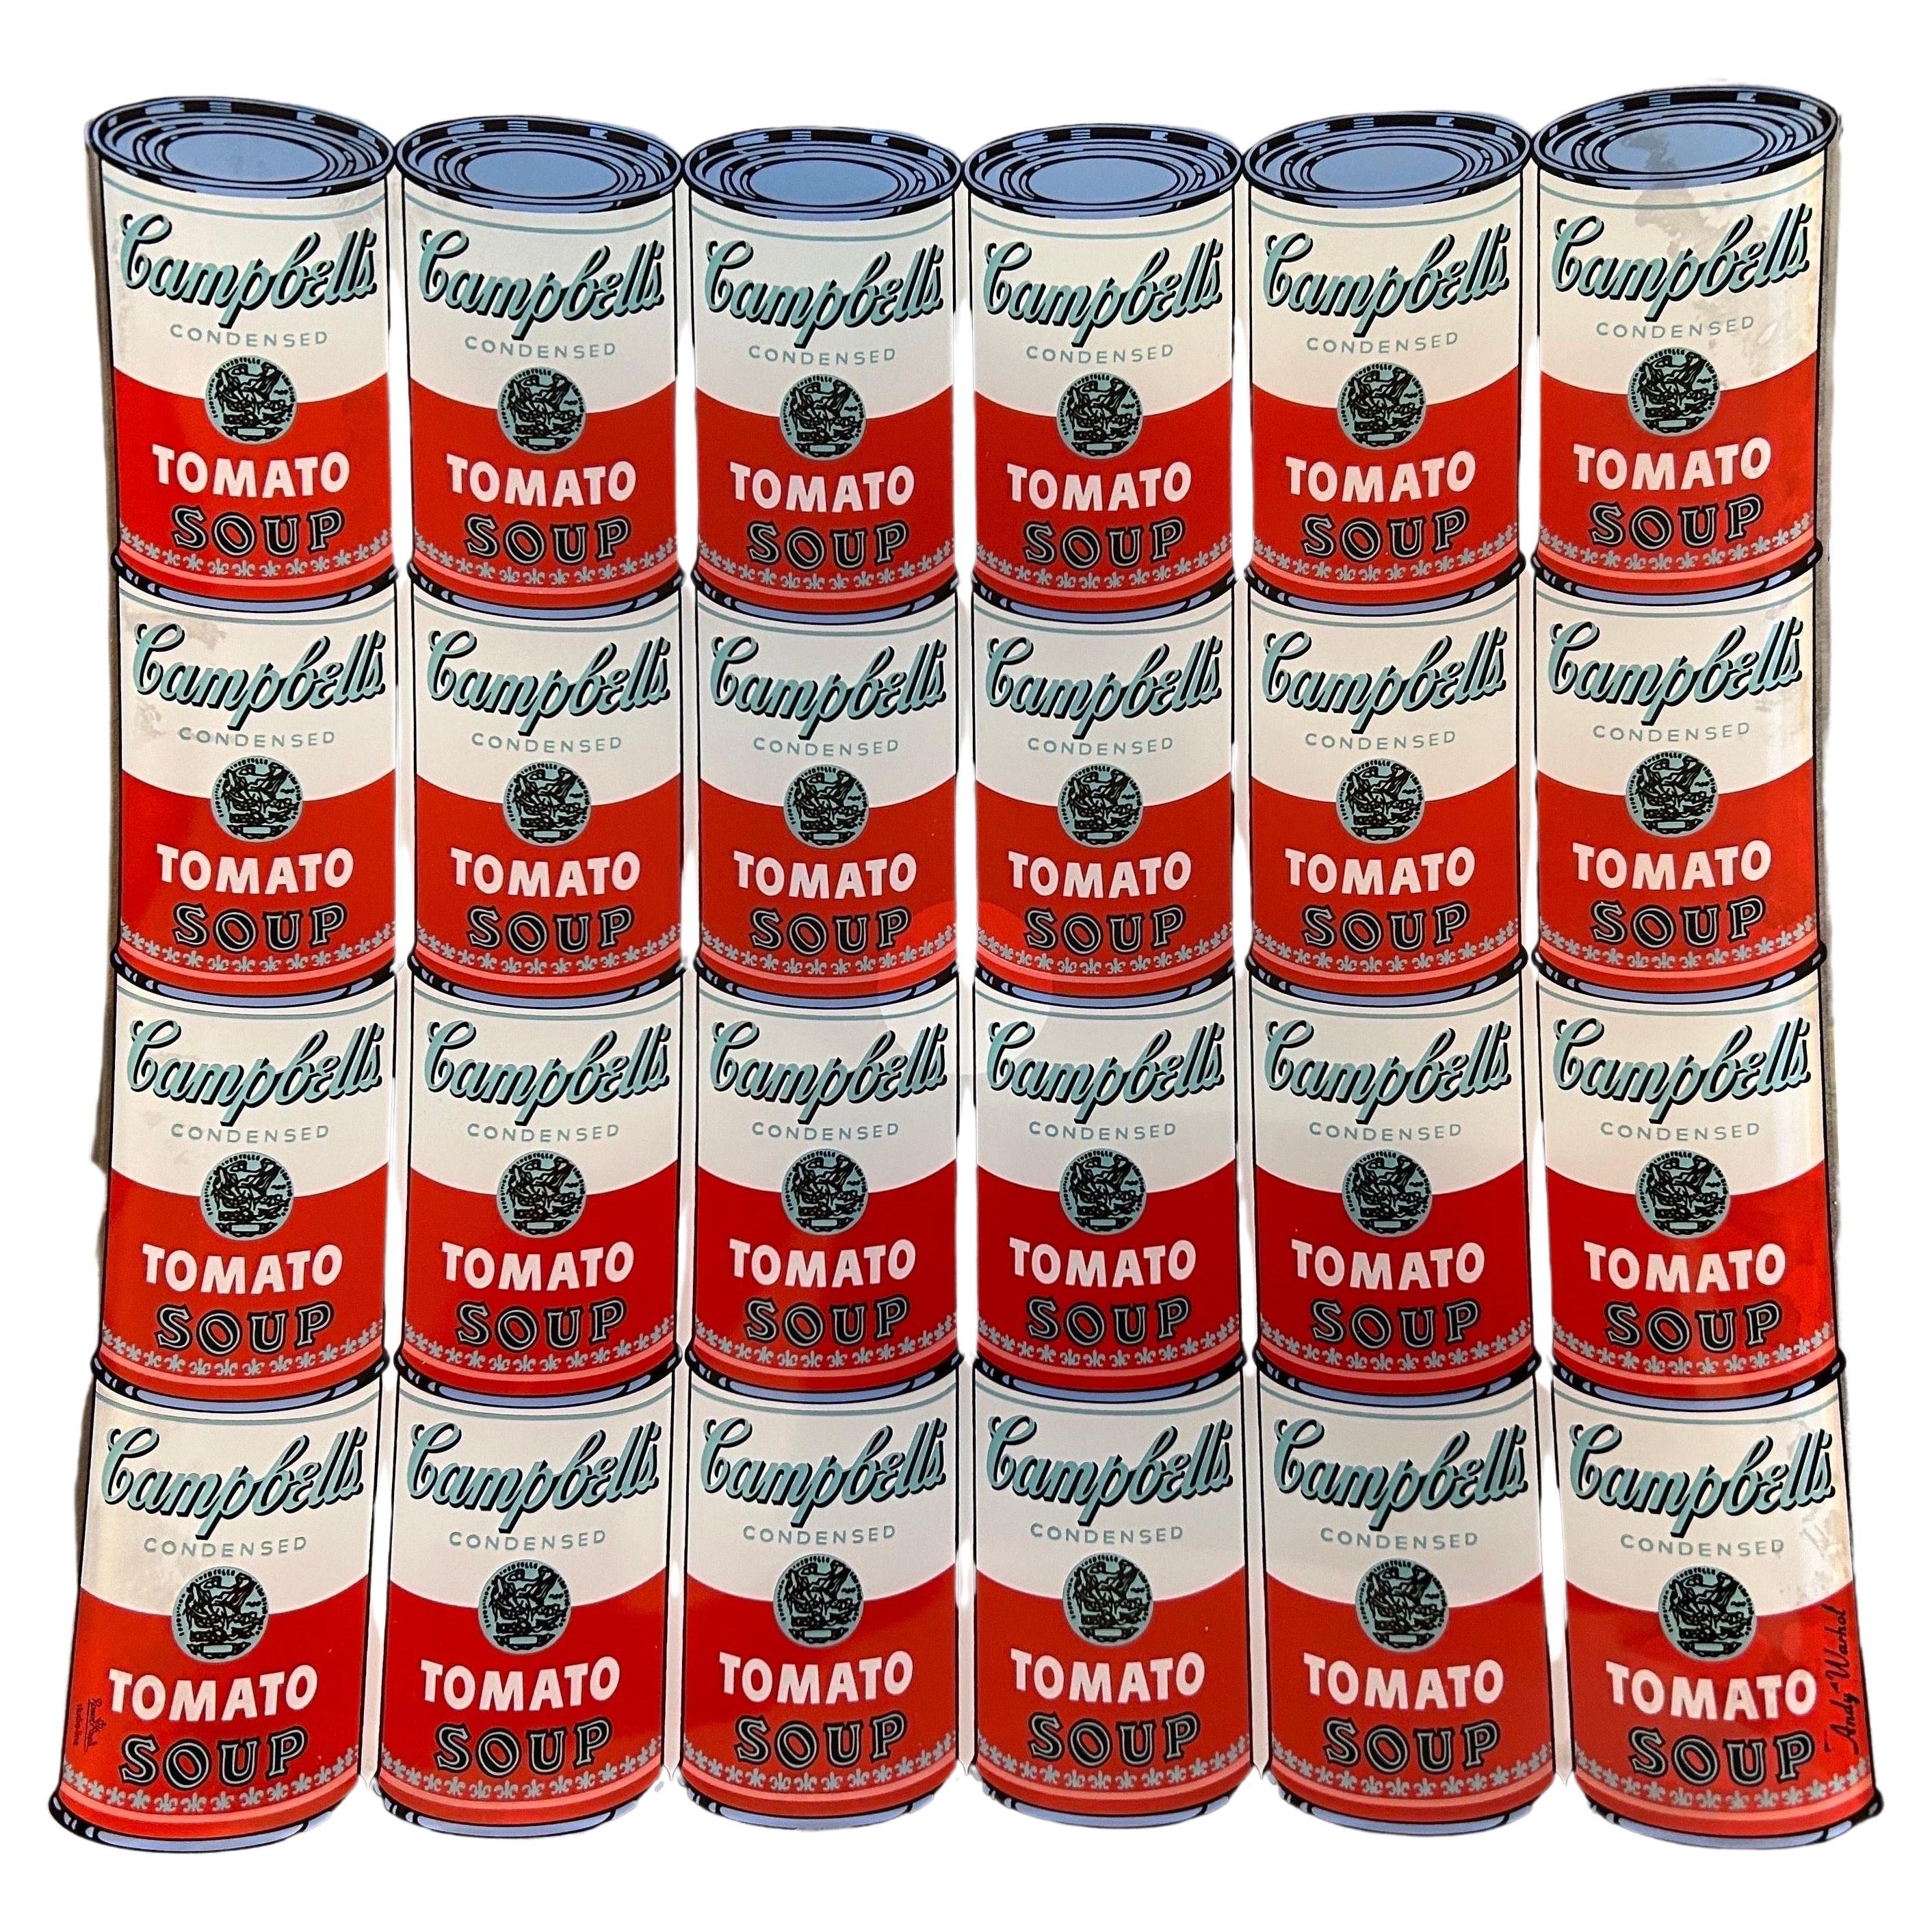 The glass tray designed by Andy Warhol for Rosenthal is a decorative tray that features Warhol's iconic Campbell Soup can designs. This tray was created in the 1990s by Rosenthal, a German porcelain and glassware manufacturer, as part of a limited